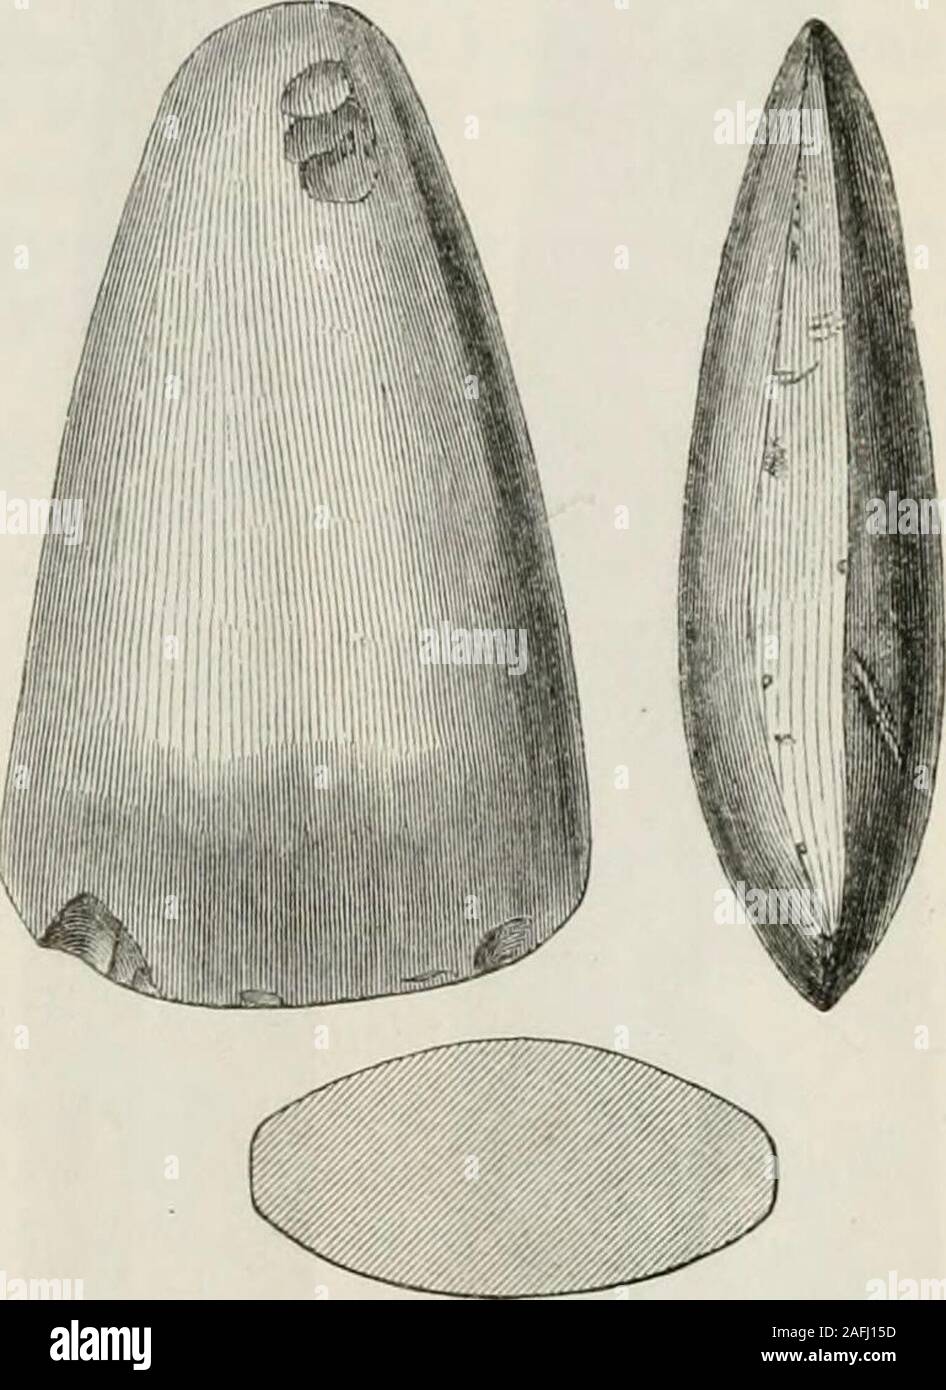 . The ancient stone implements, weapons, and ornaments, of Great Britain. Fig. .58.—Burradon, Norlhumbeiiaiid. Fijj. 59.—Livermere, Suffolk. Stock Photo